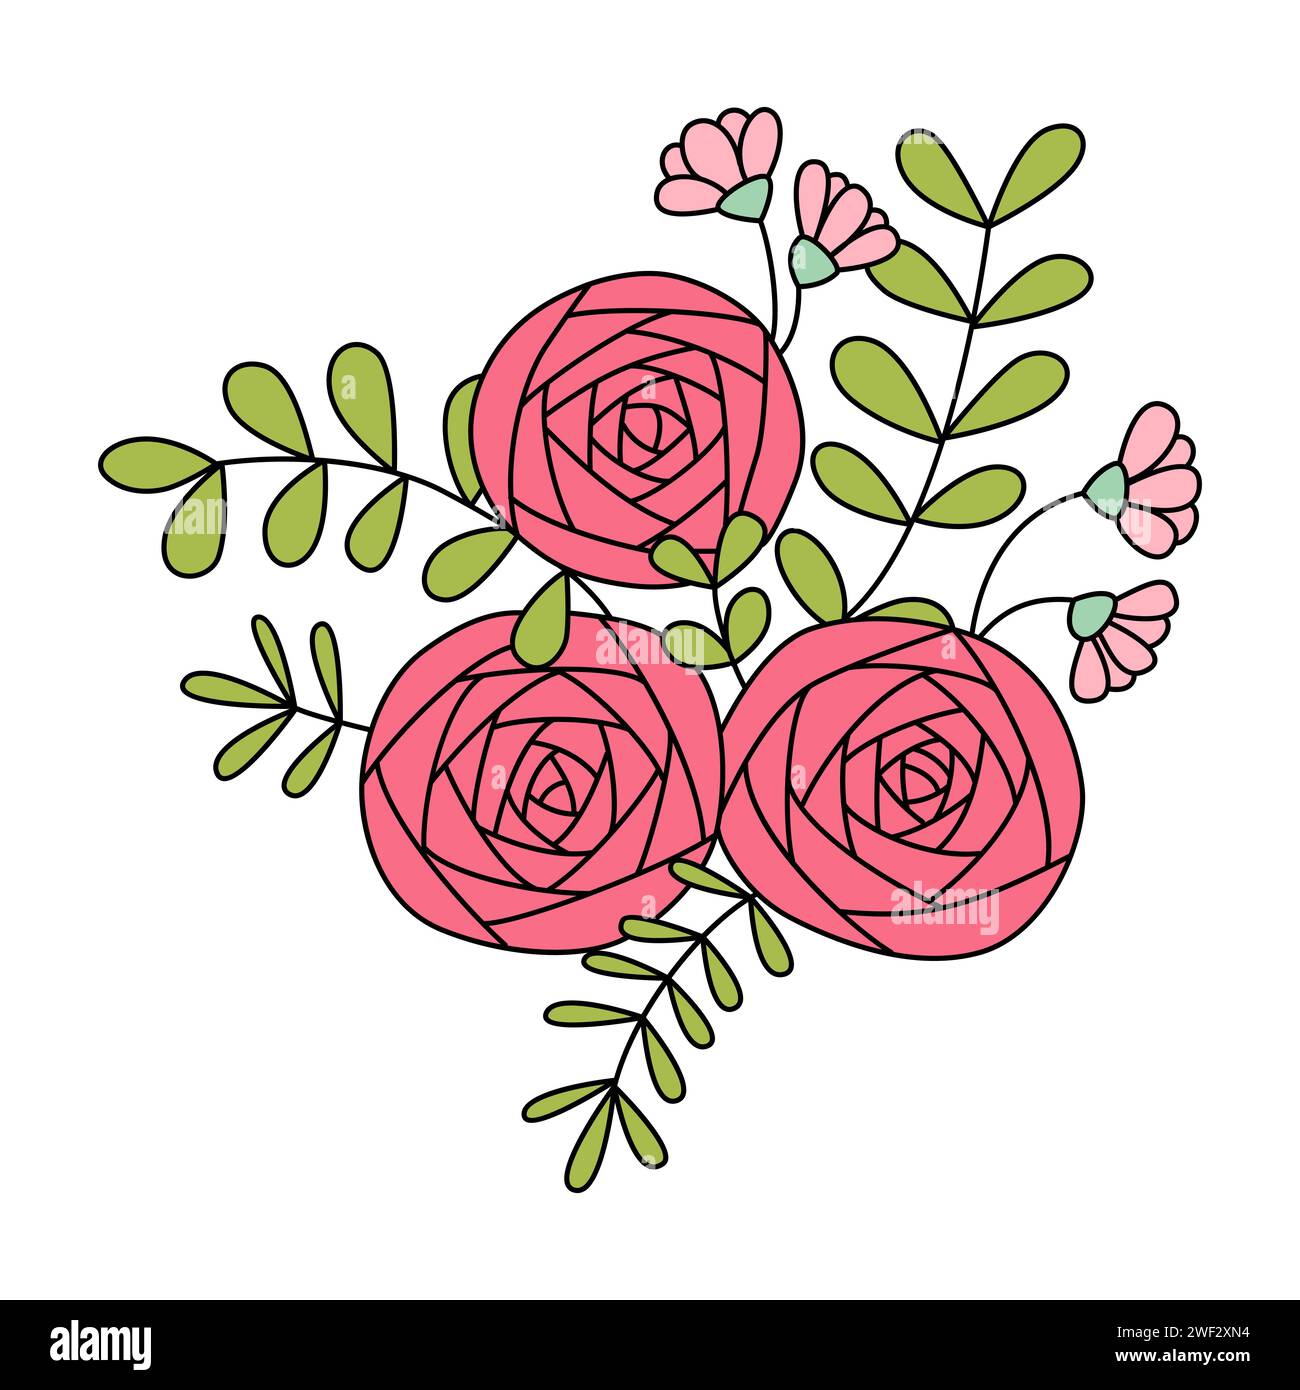 Flower bouquet illustration in cartoon style. Isolated on white background Stock Vector